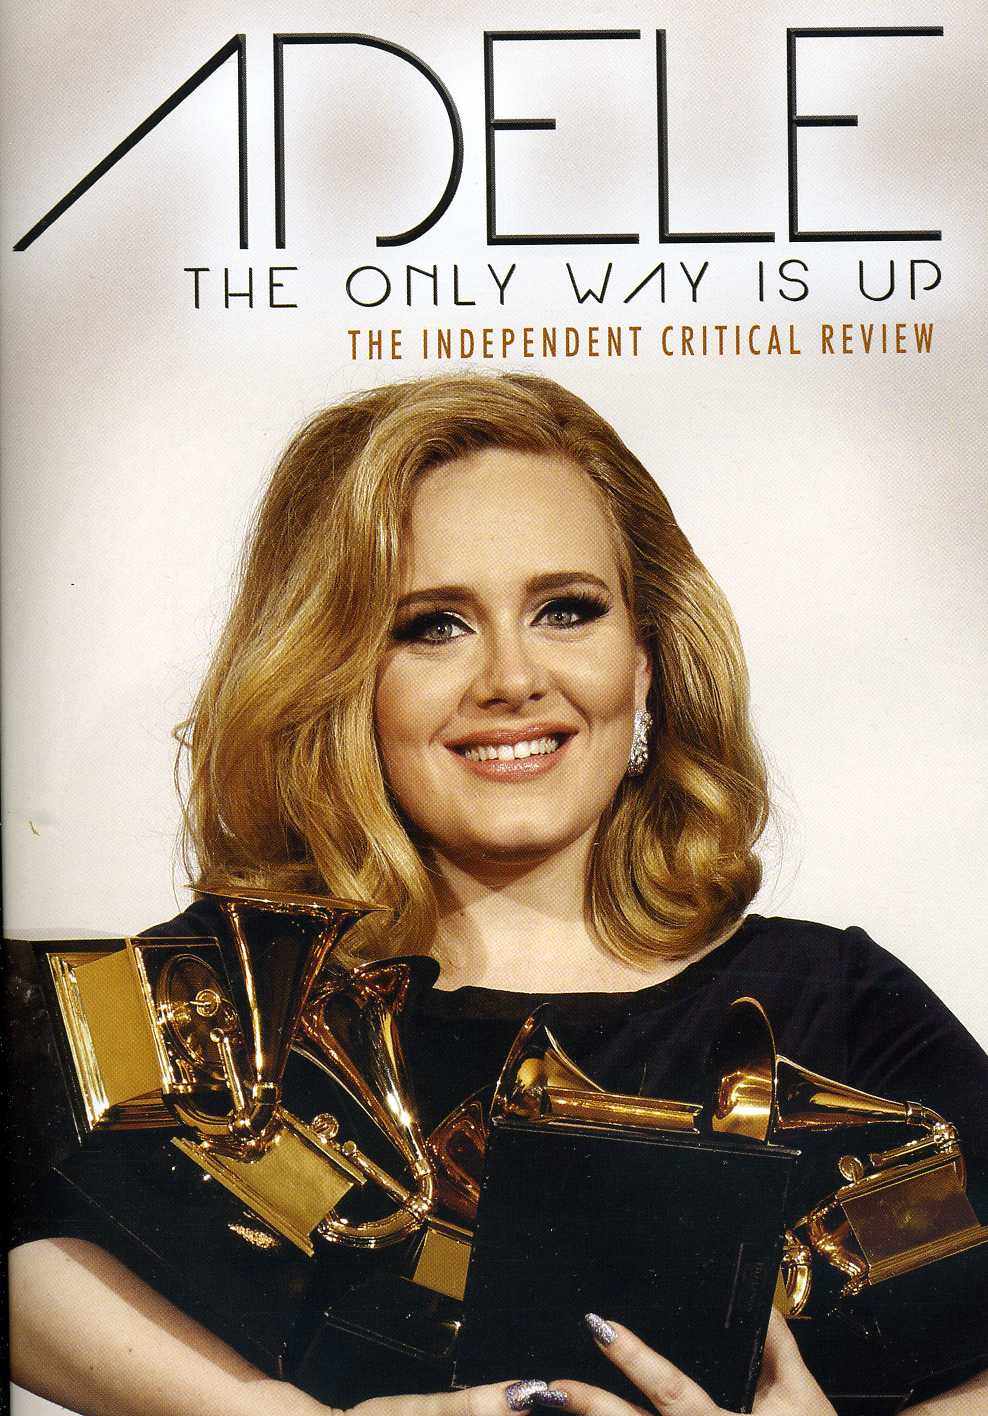 ADELE: THE ONLY WAY IS UP